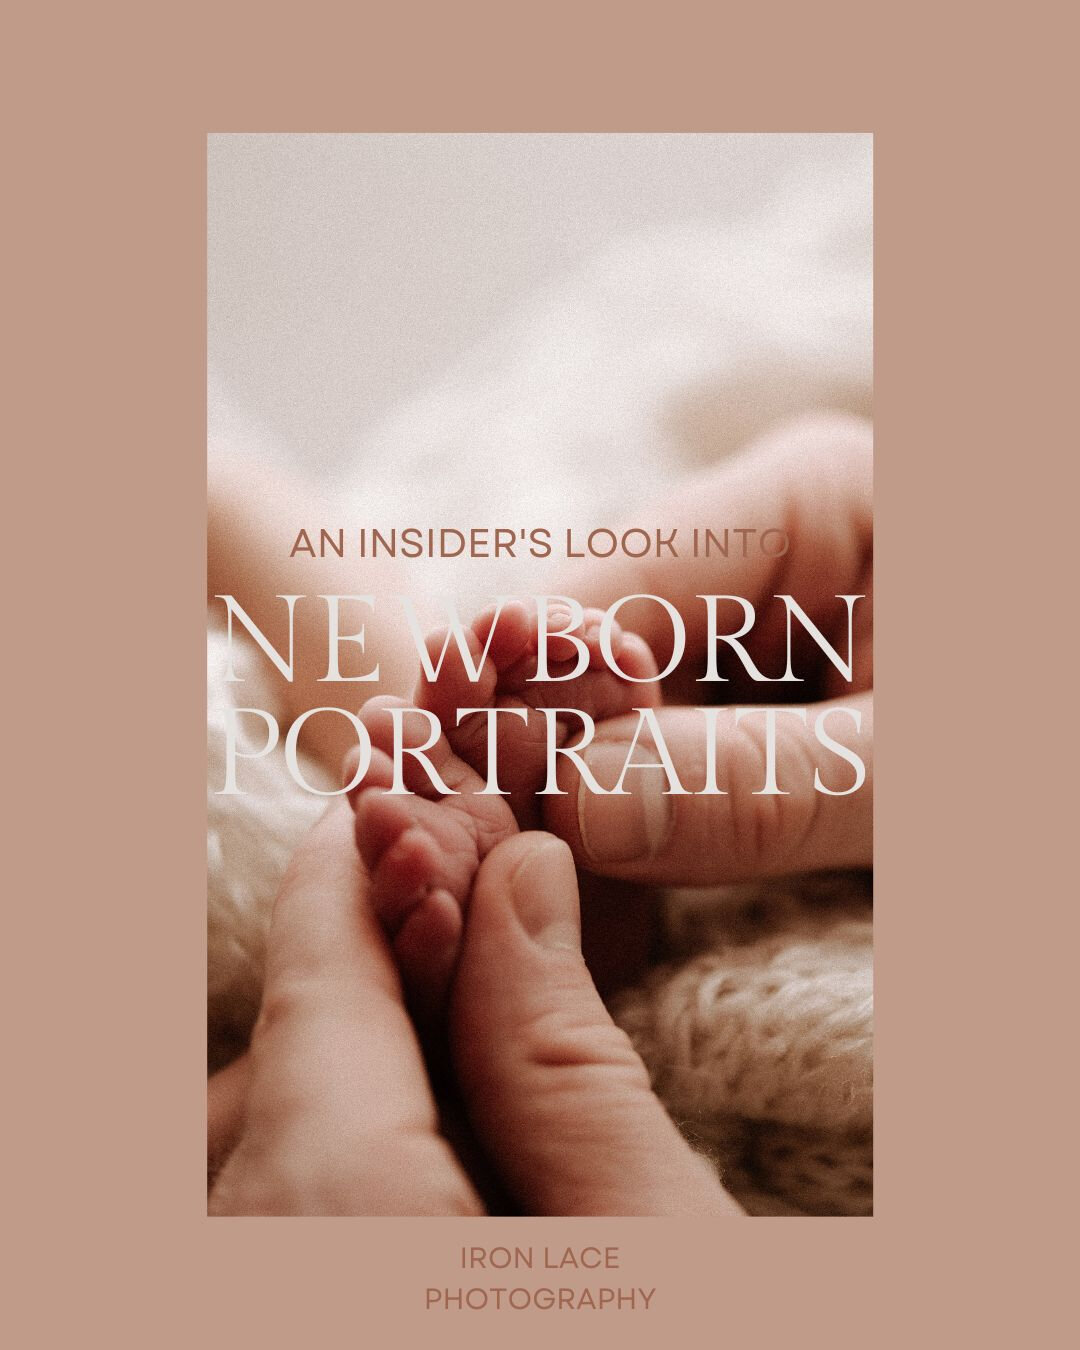 An insider's look into Newborn Portraits with Iron Lace Photography​​​​​​​​​
www.iron-lace.com

#NewbornPhotography #Newborn #ClarksvilleNewbornPhotographer #ClarksvillePhotographer #baby #NewbornArt #TennesseeNewbornPhotography #NewParents #PosedNew